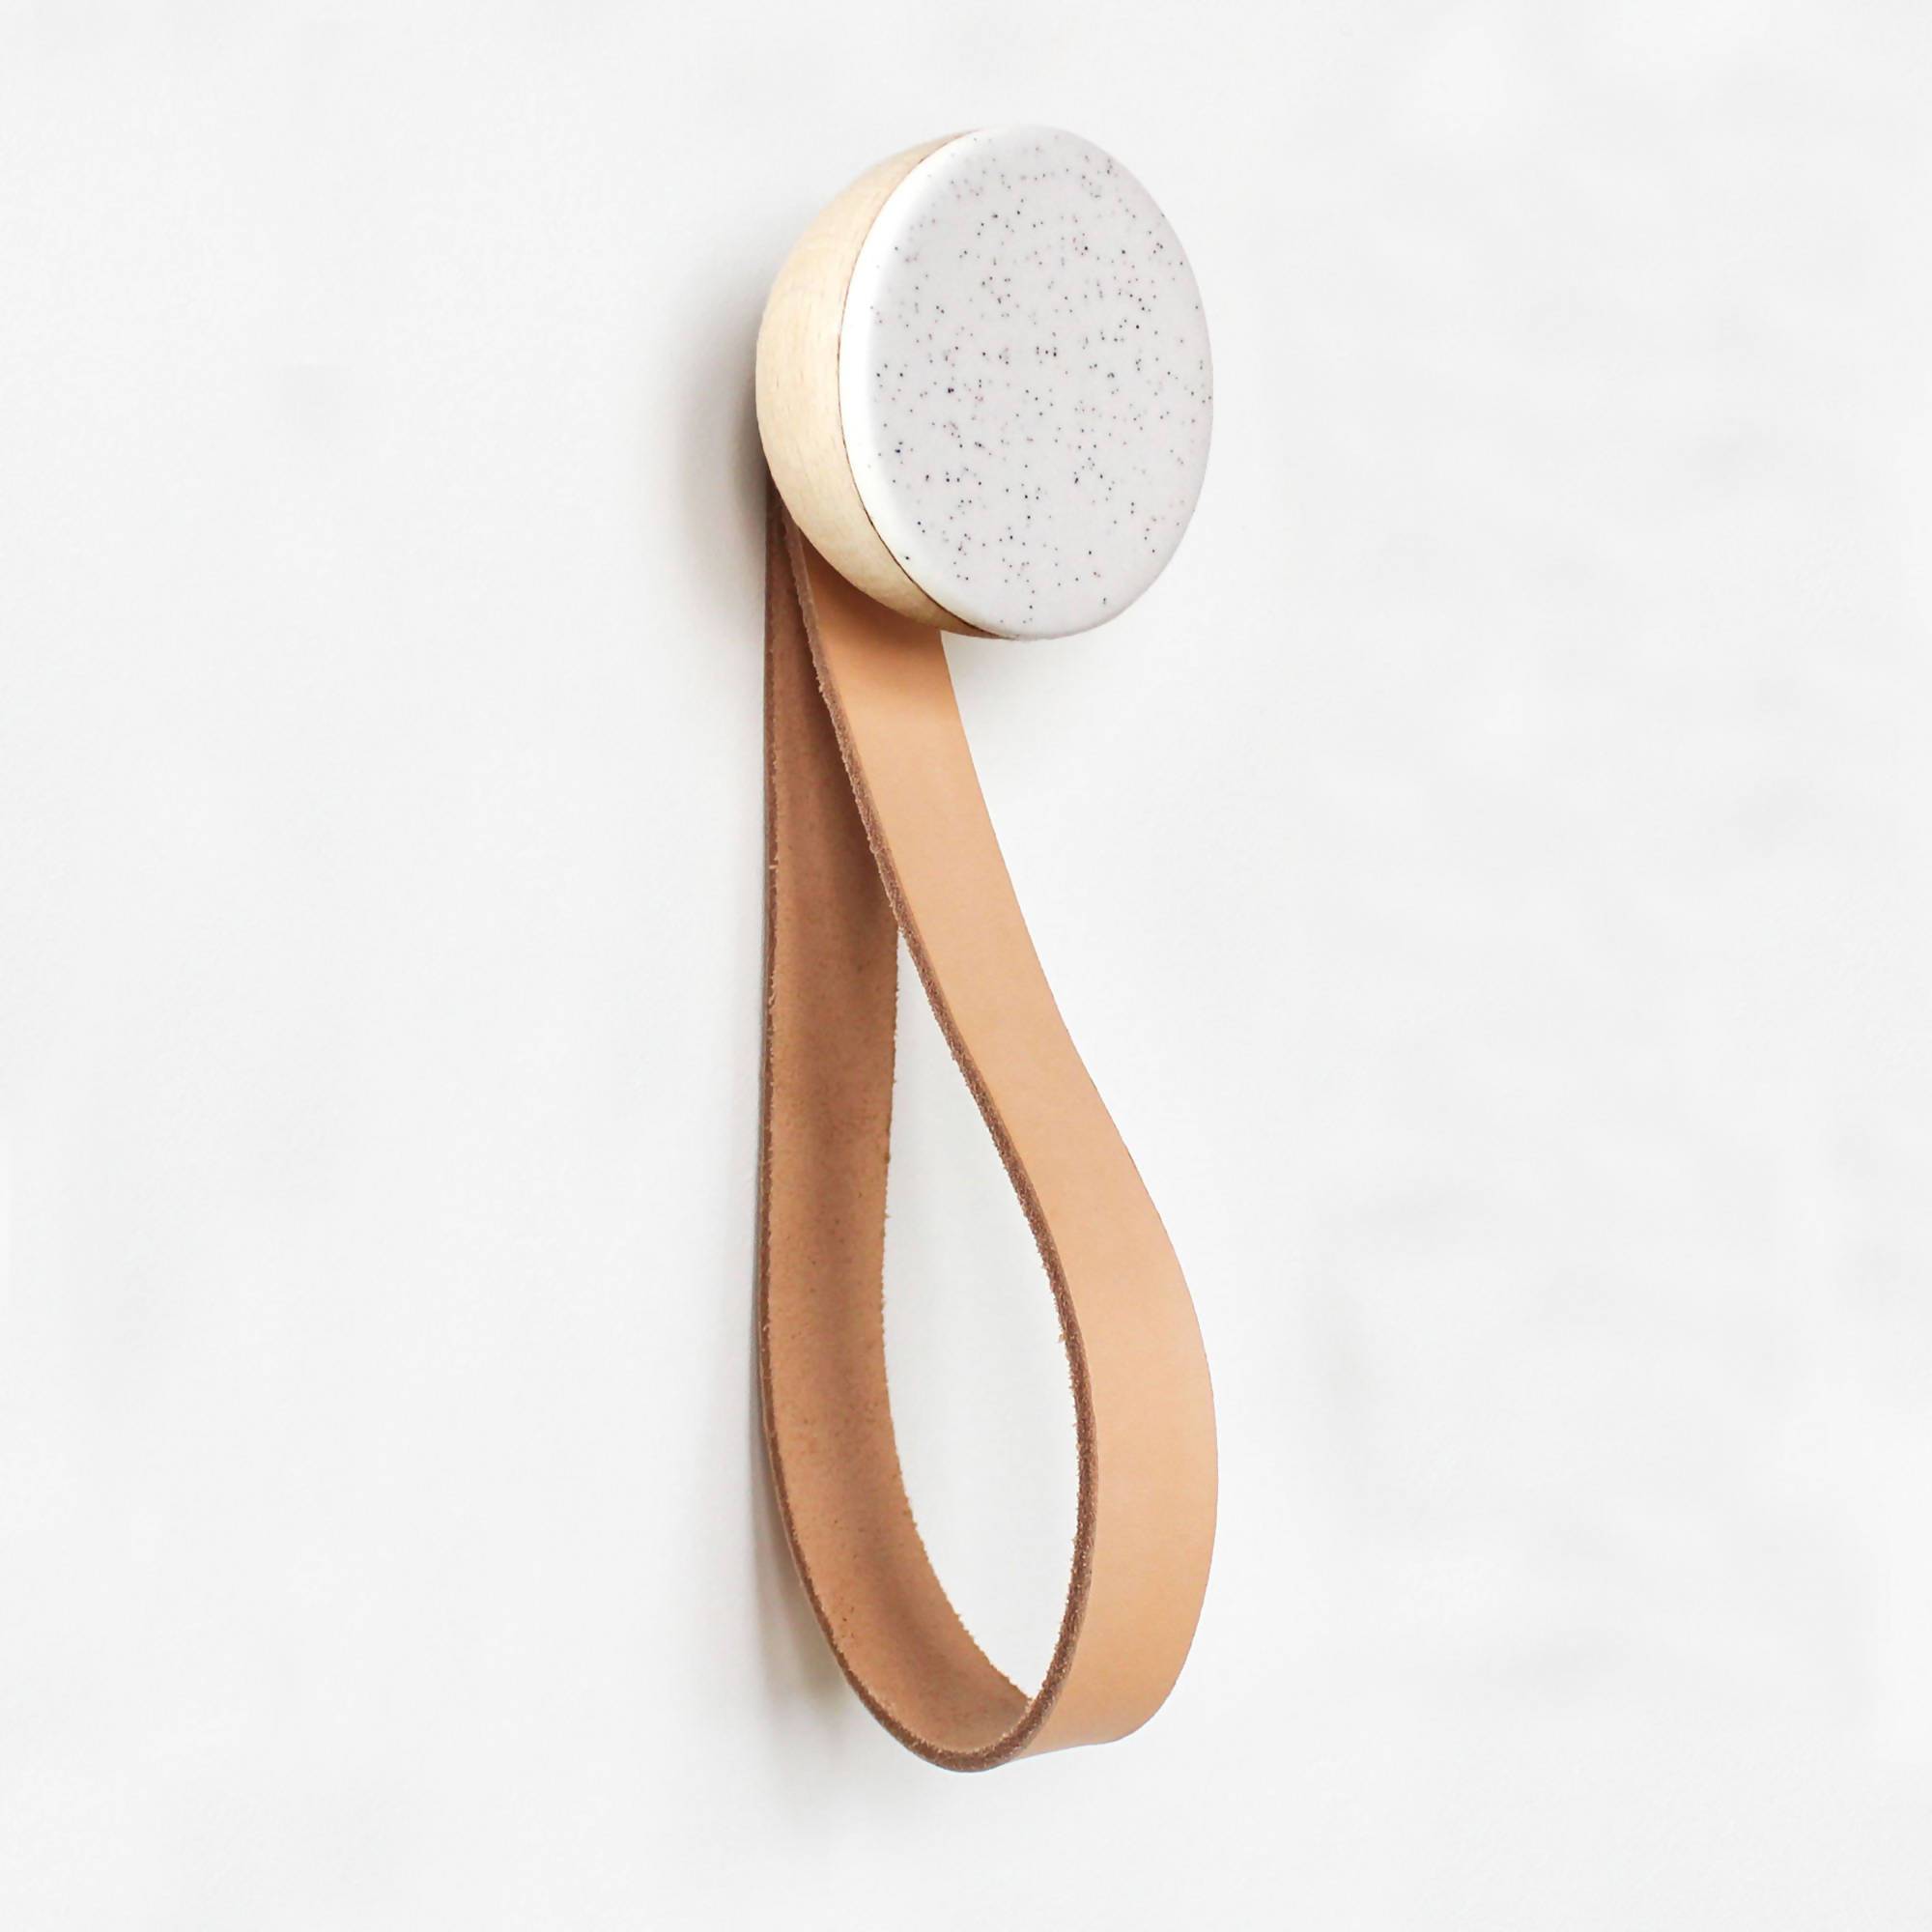 Round Beech Wood & Ceramic Wall Mounted Coat Hook / Hanger with Leather Strap - White Sand Home Decor 5mm Paper Diameter 6cm 